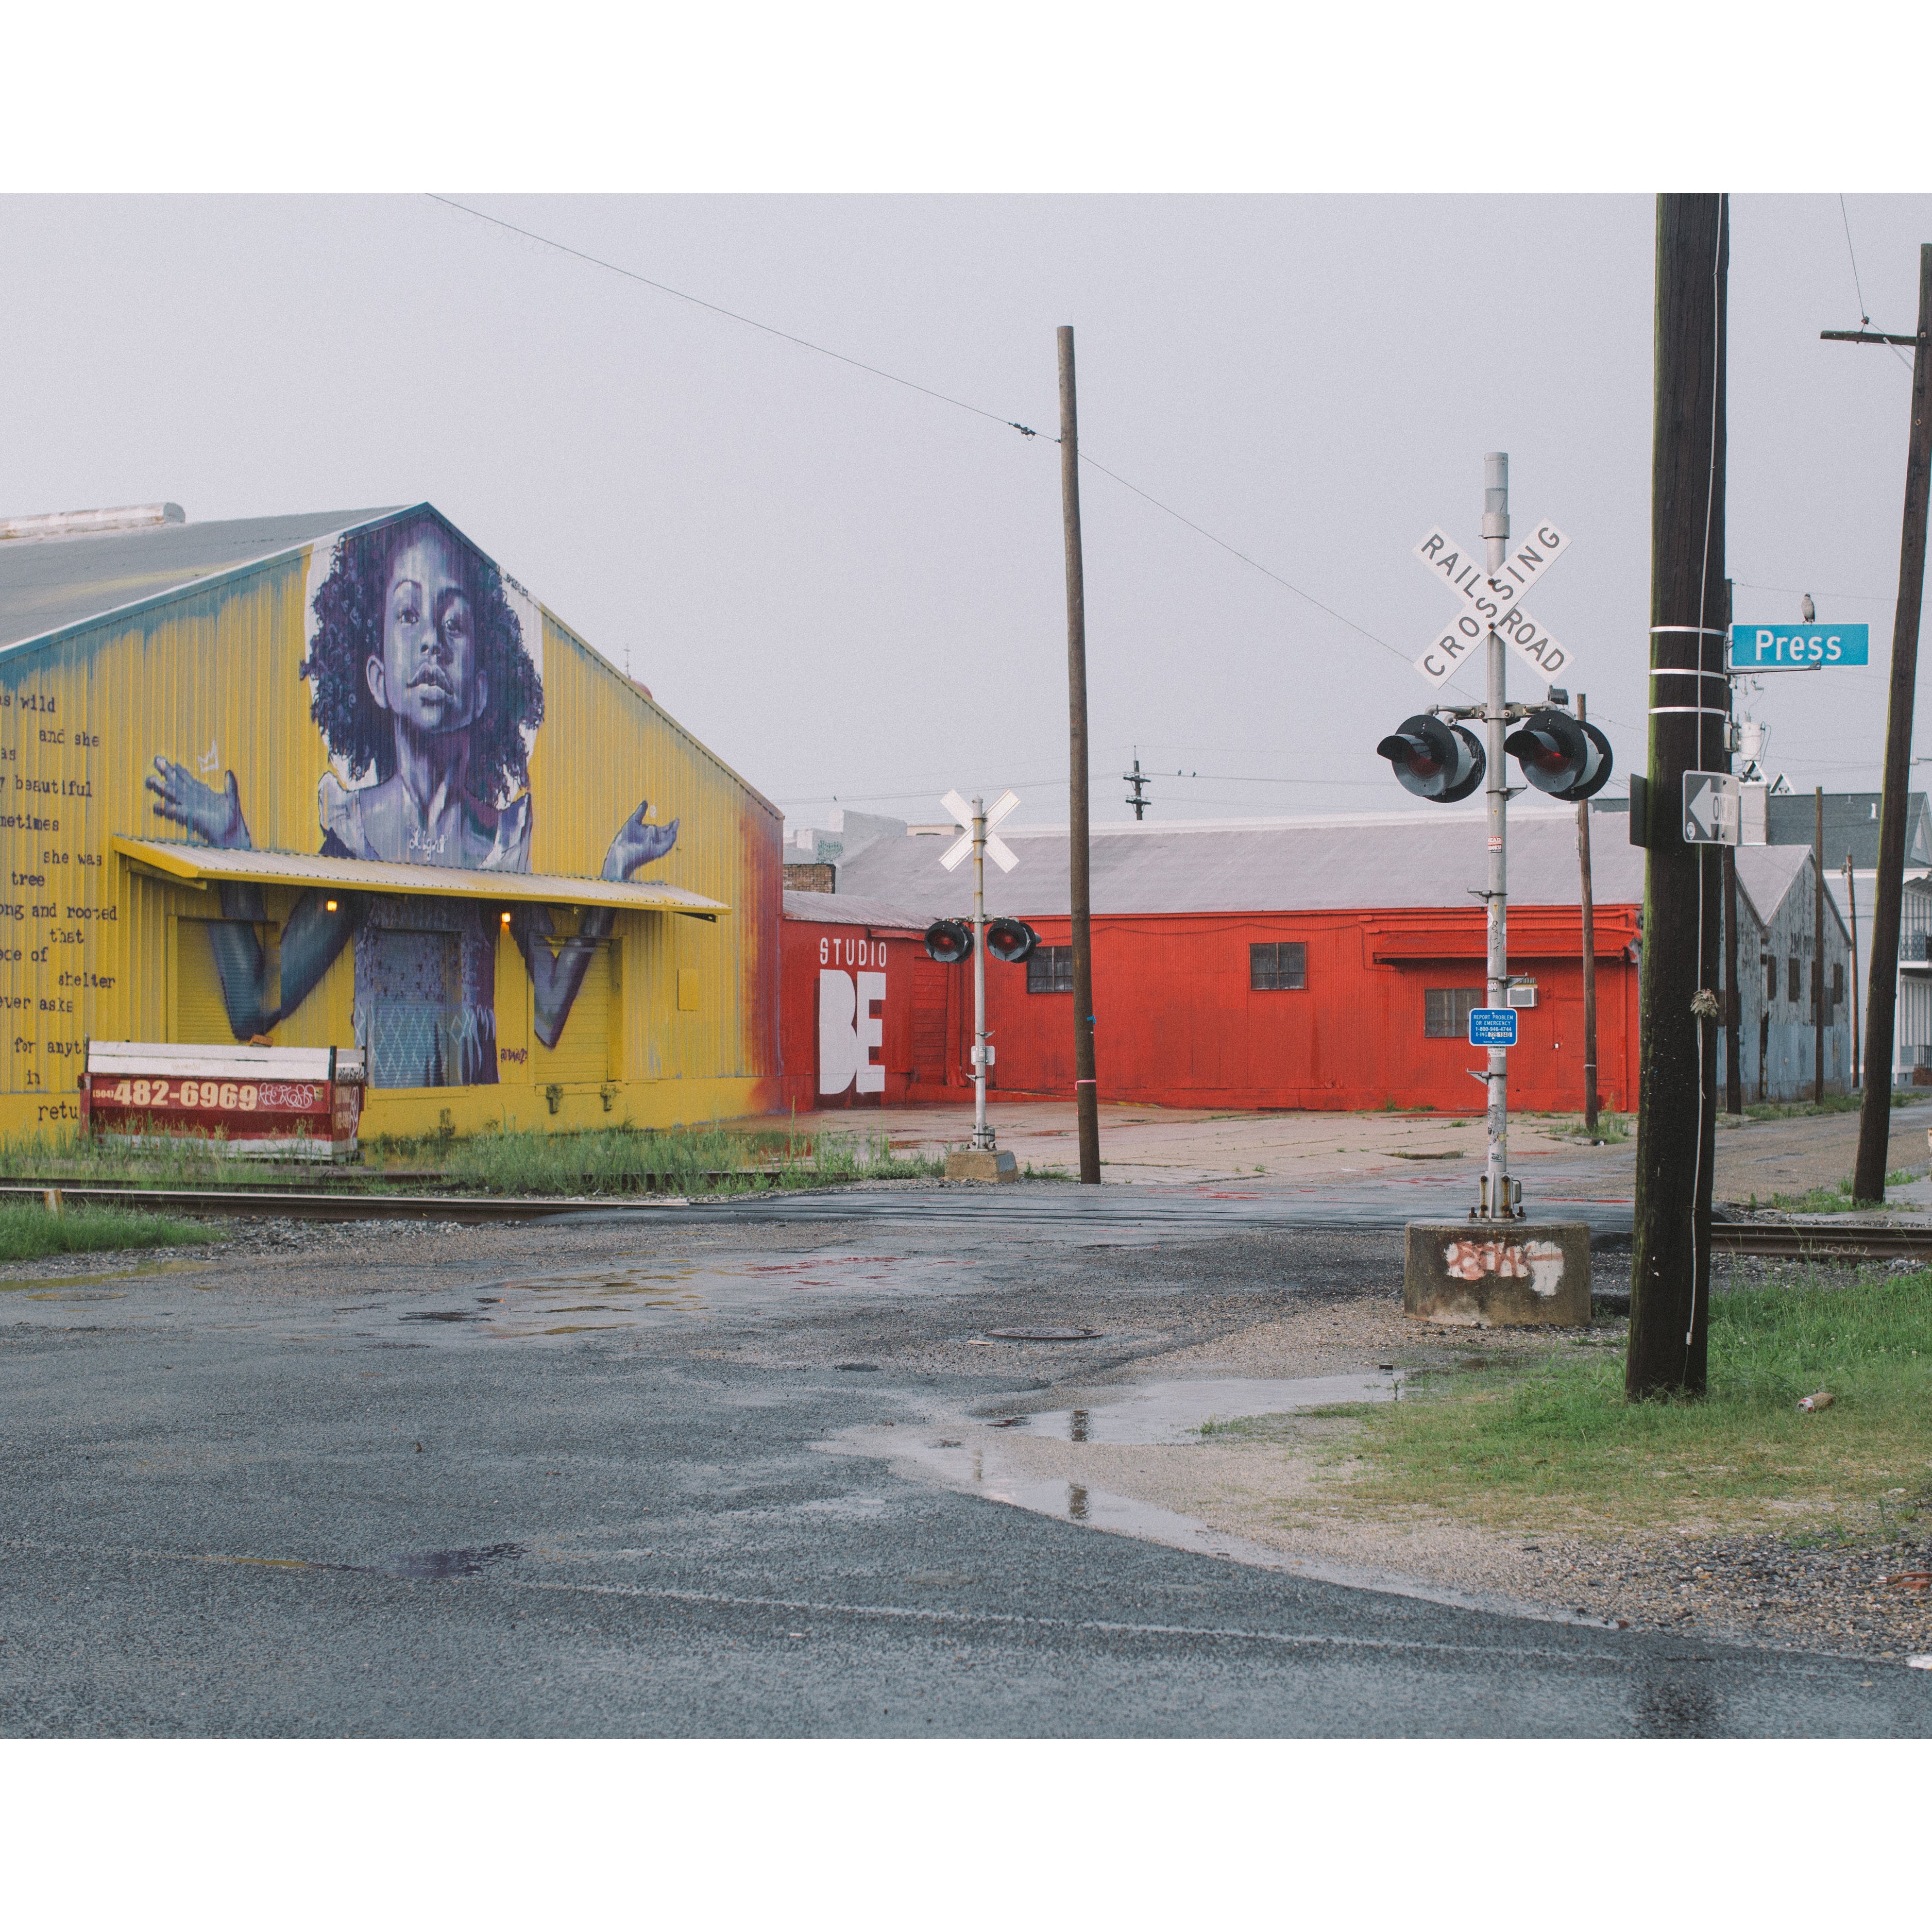 A New Orleans Travel Diary Through The Eyes of Photographer Patrick Melon
